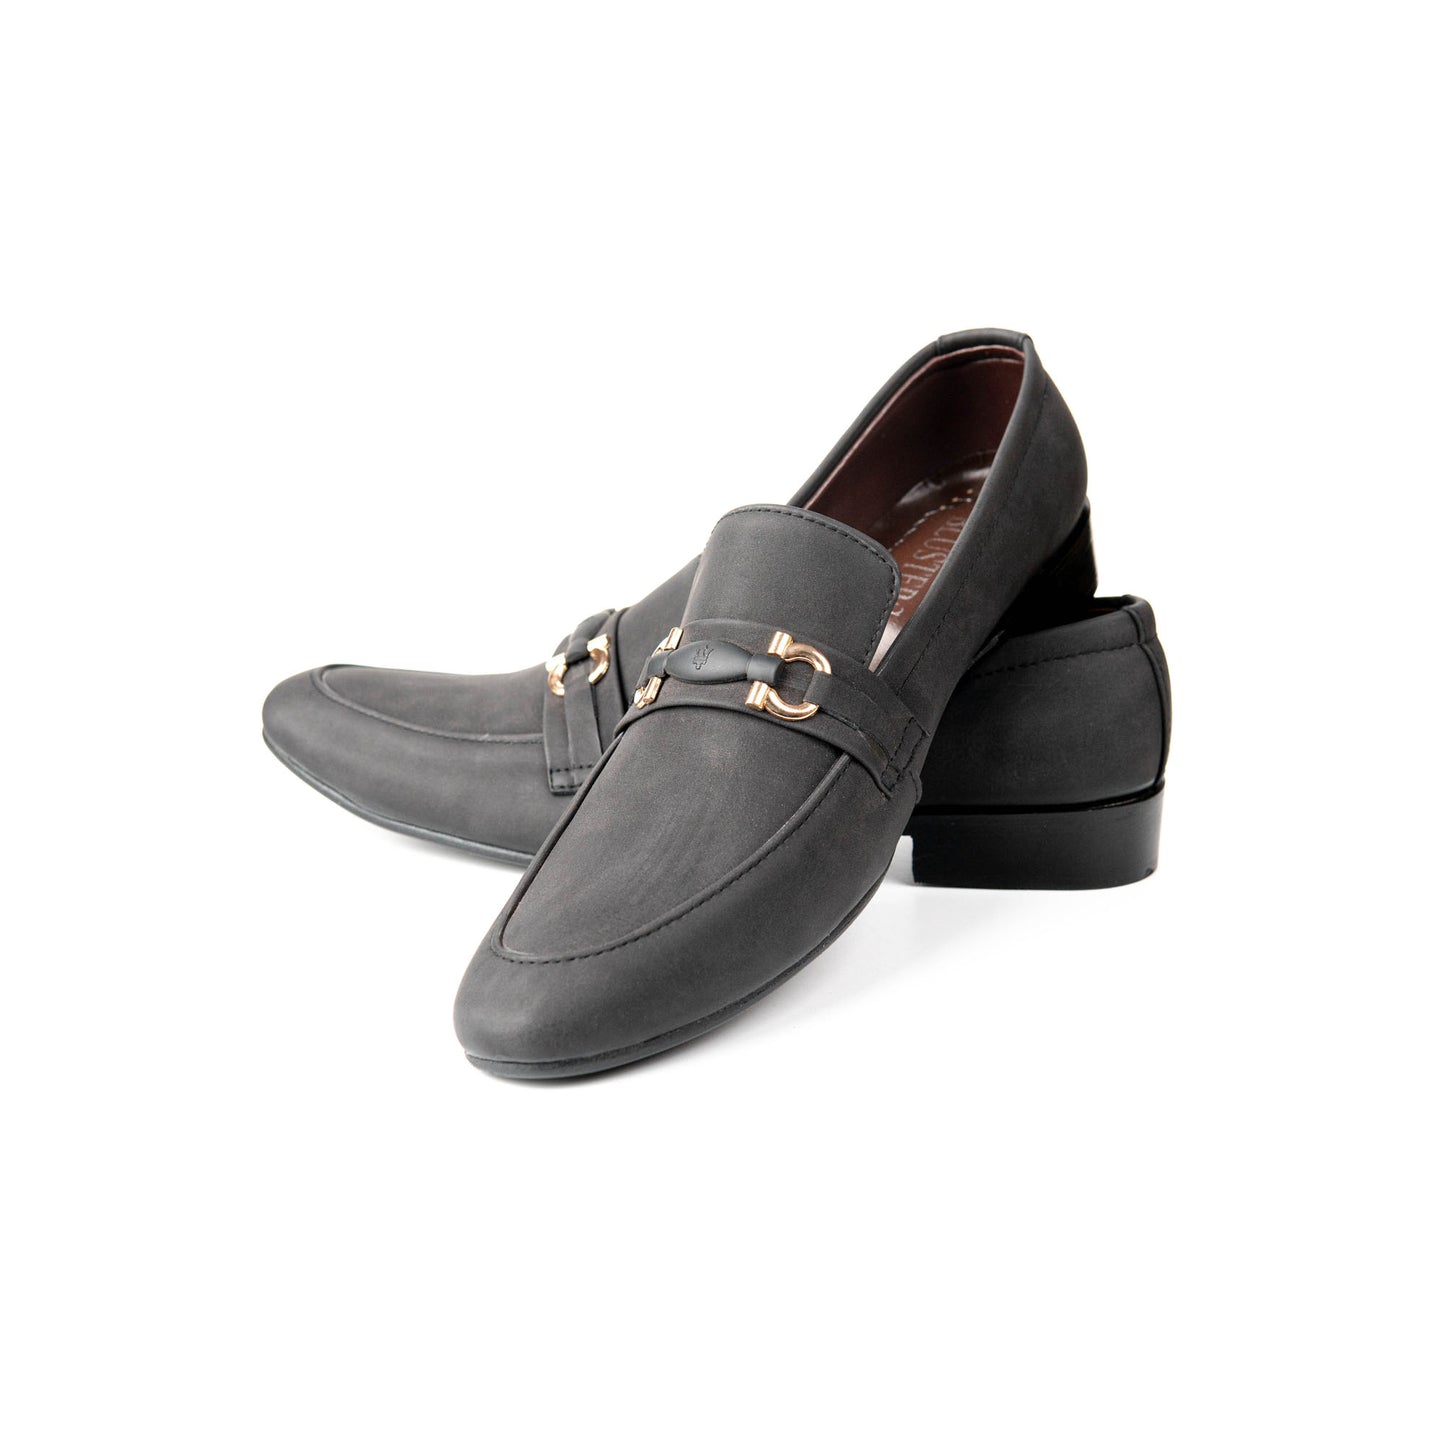 Strap Buckle PU Suede Leather Shoes